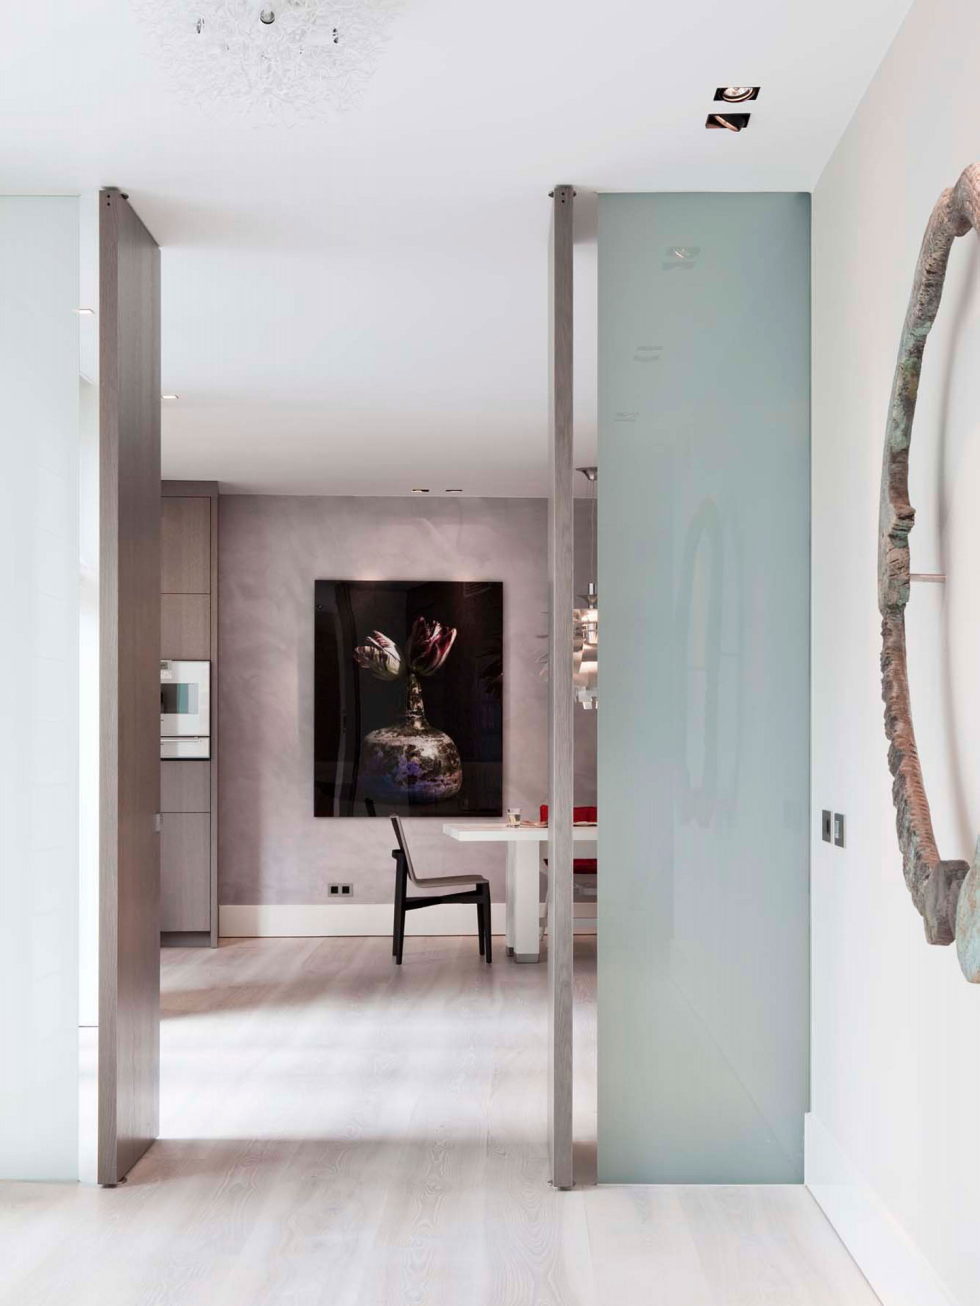 The Glass House In Amsterdam From Essentials Interieur and Roy De Scheemaker 16